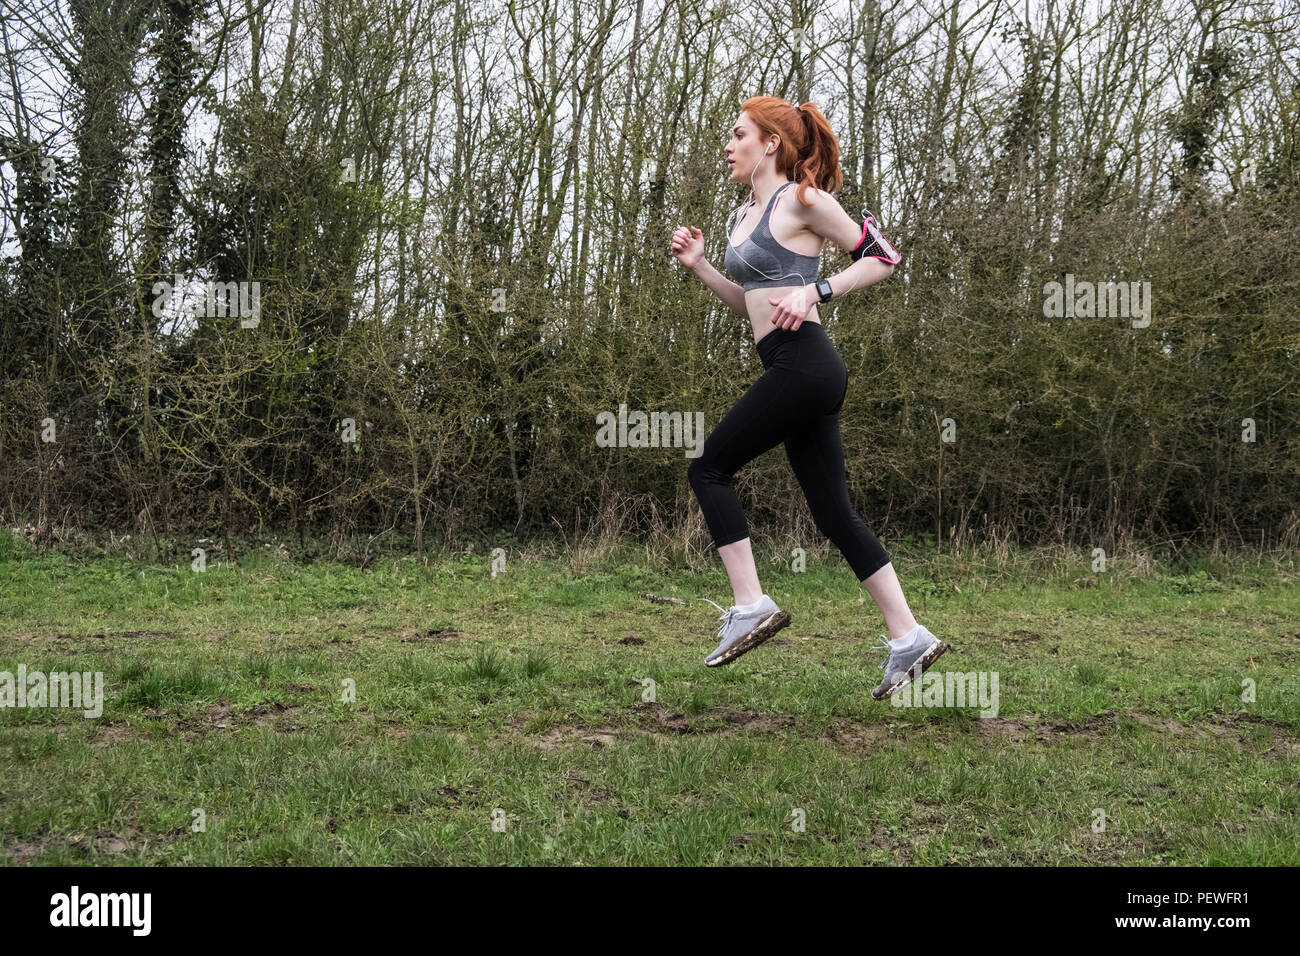 Young woman with long red hair wearing sportswear, exercising outdoors. Stock Photo